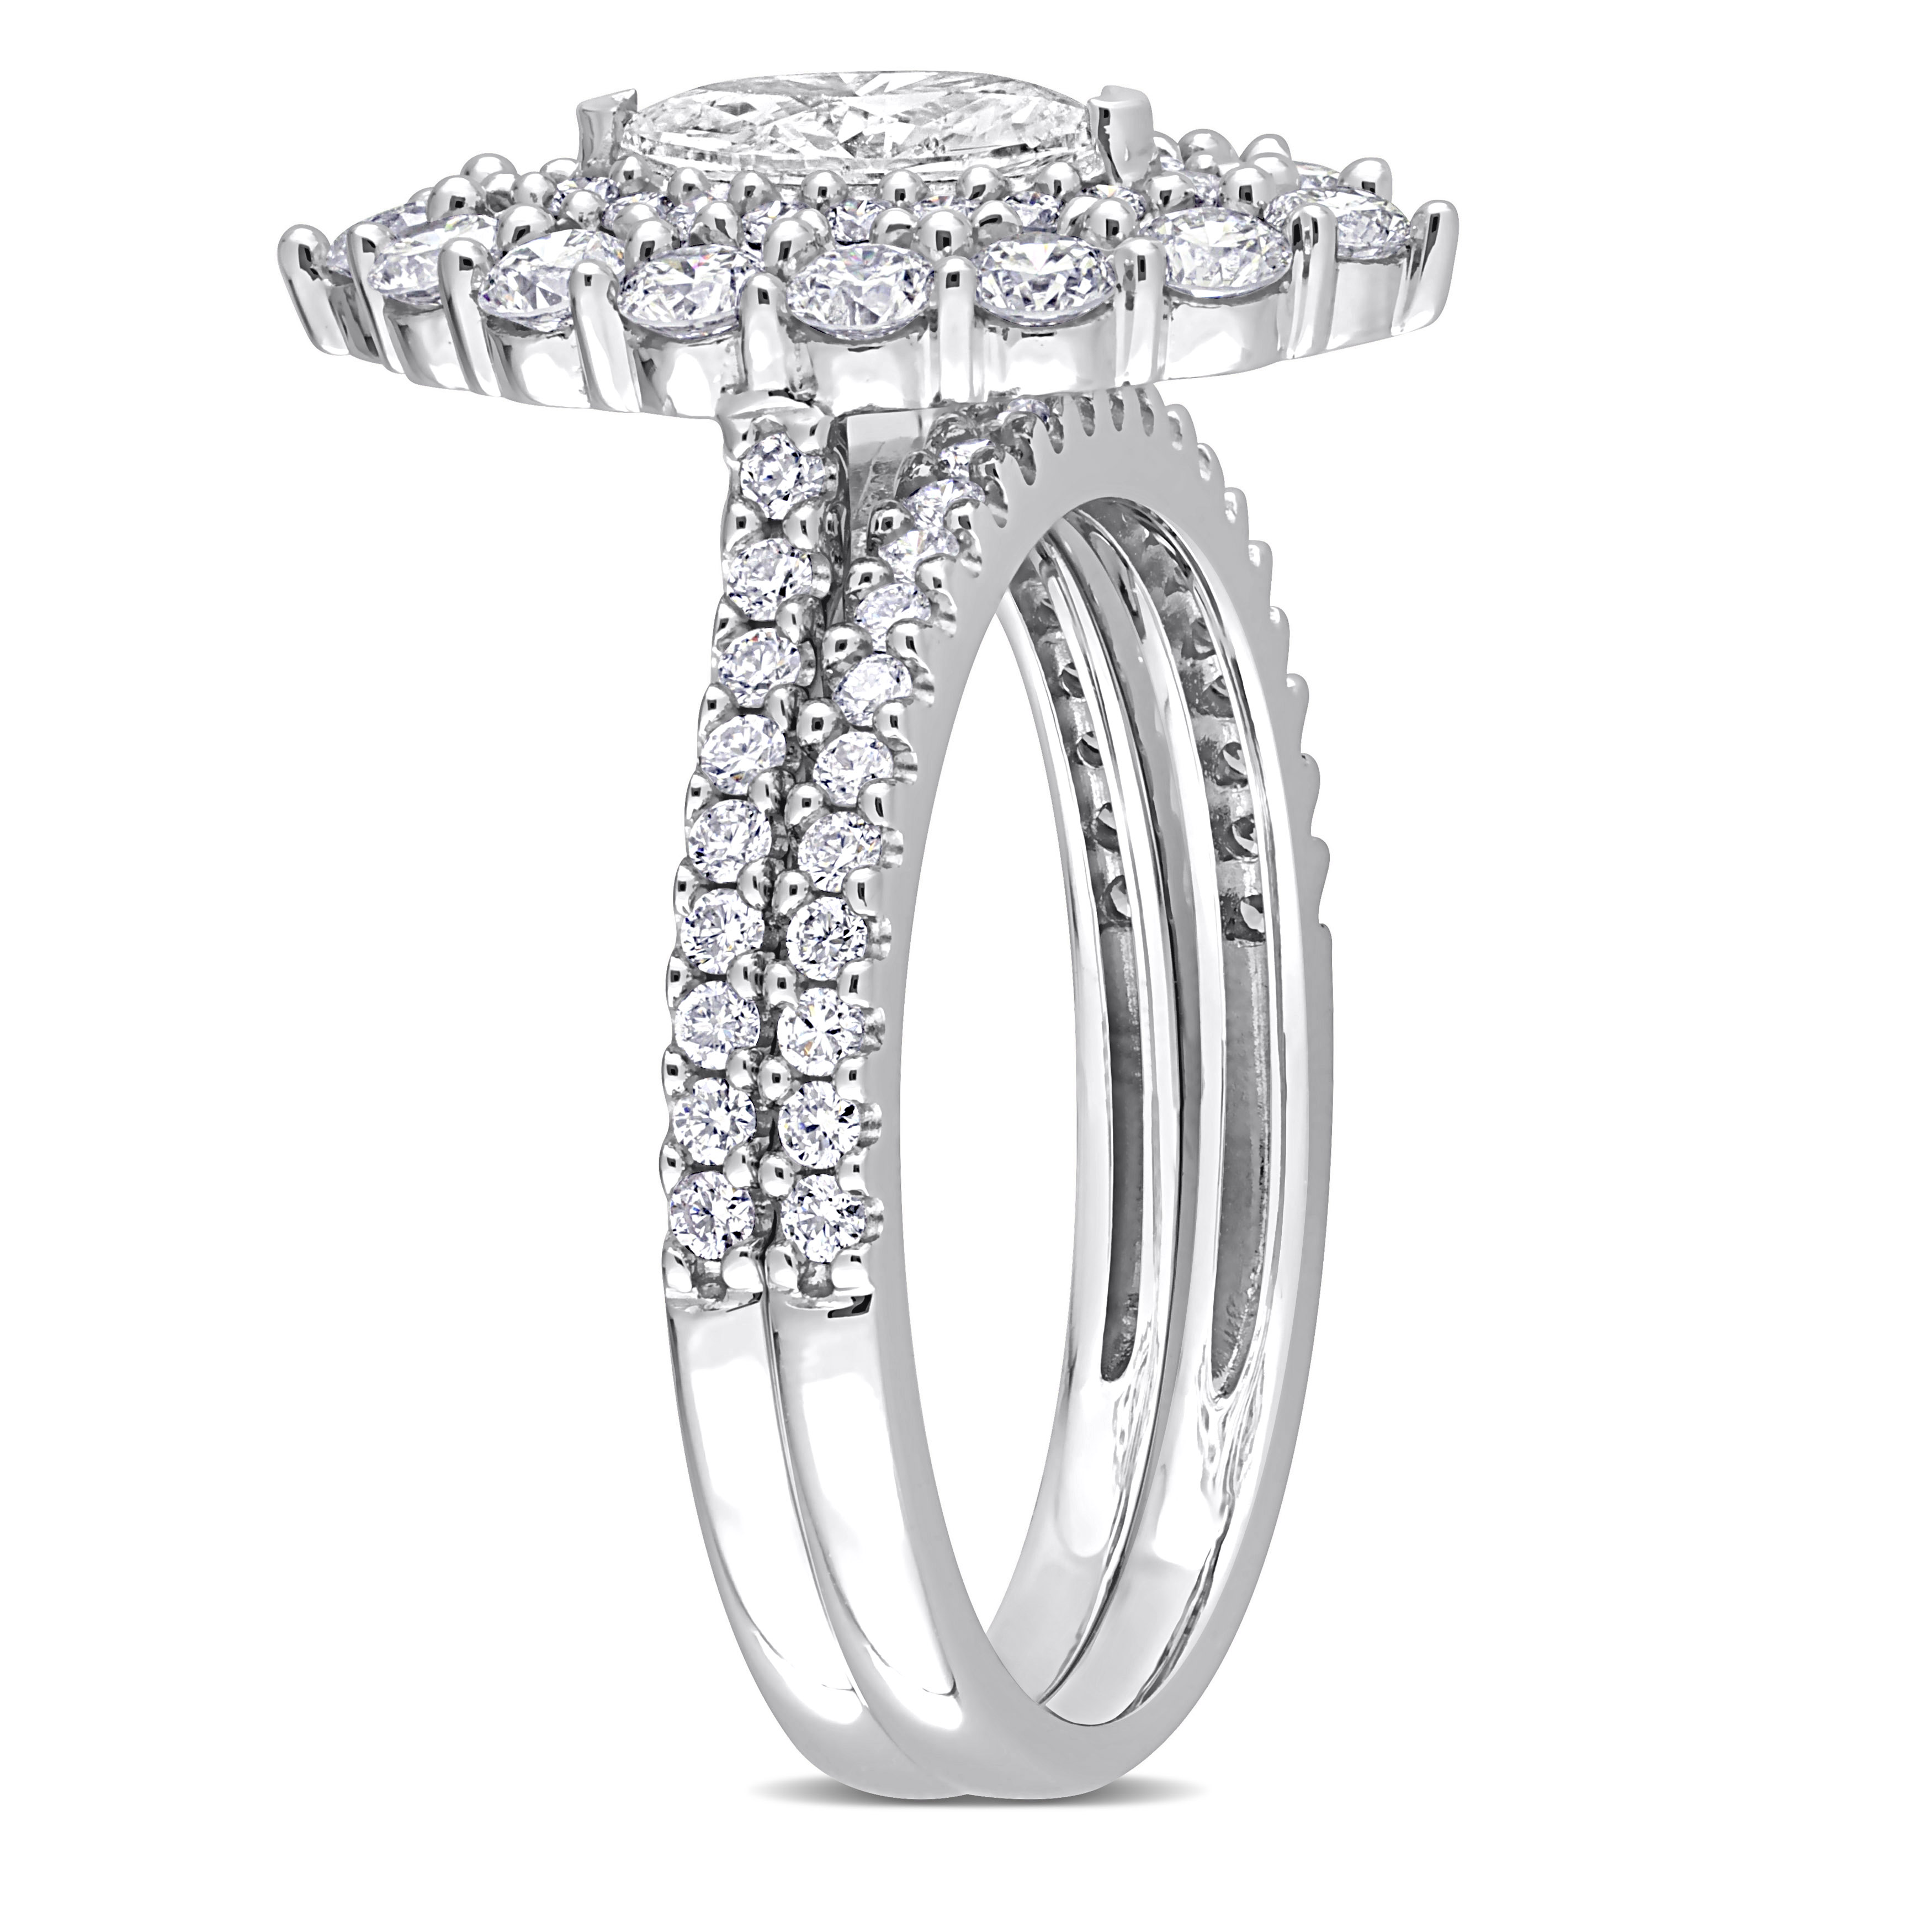 1/2 CT TW Marquise & Round Diamond Double Halo Cluster Bridal Set in 14k White Gold